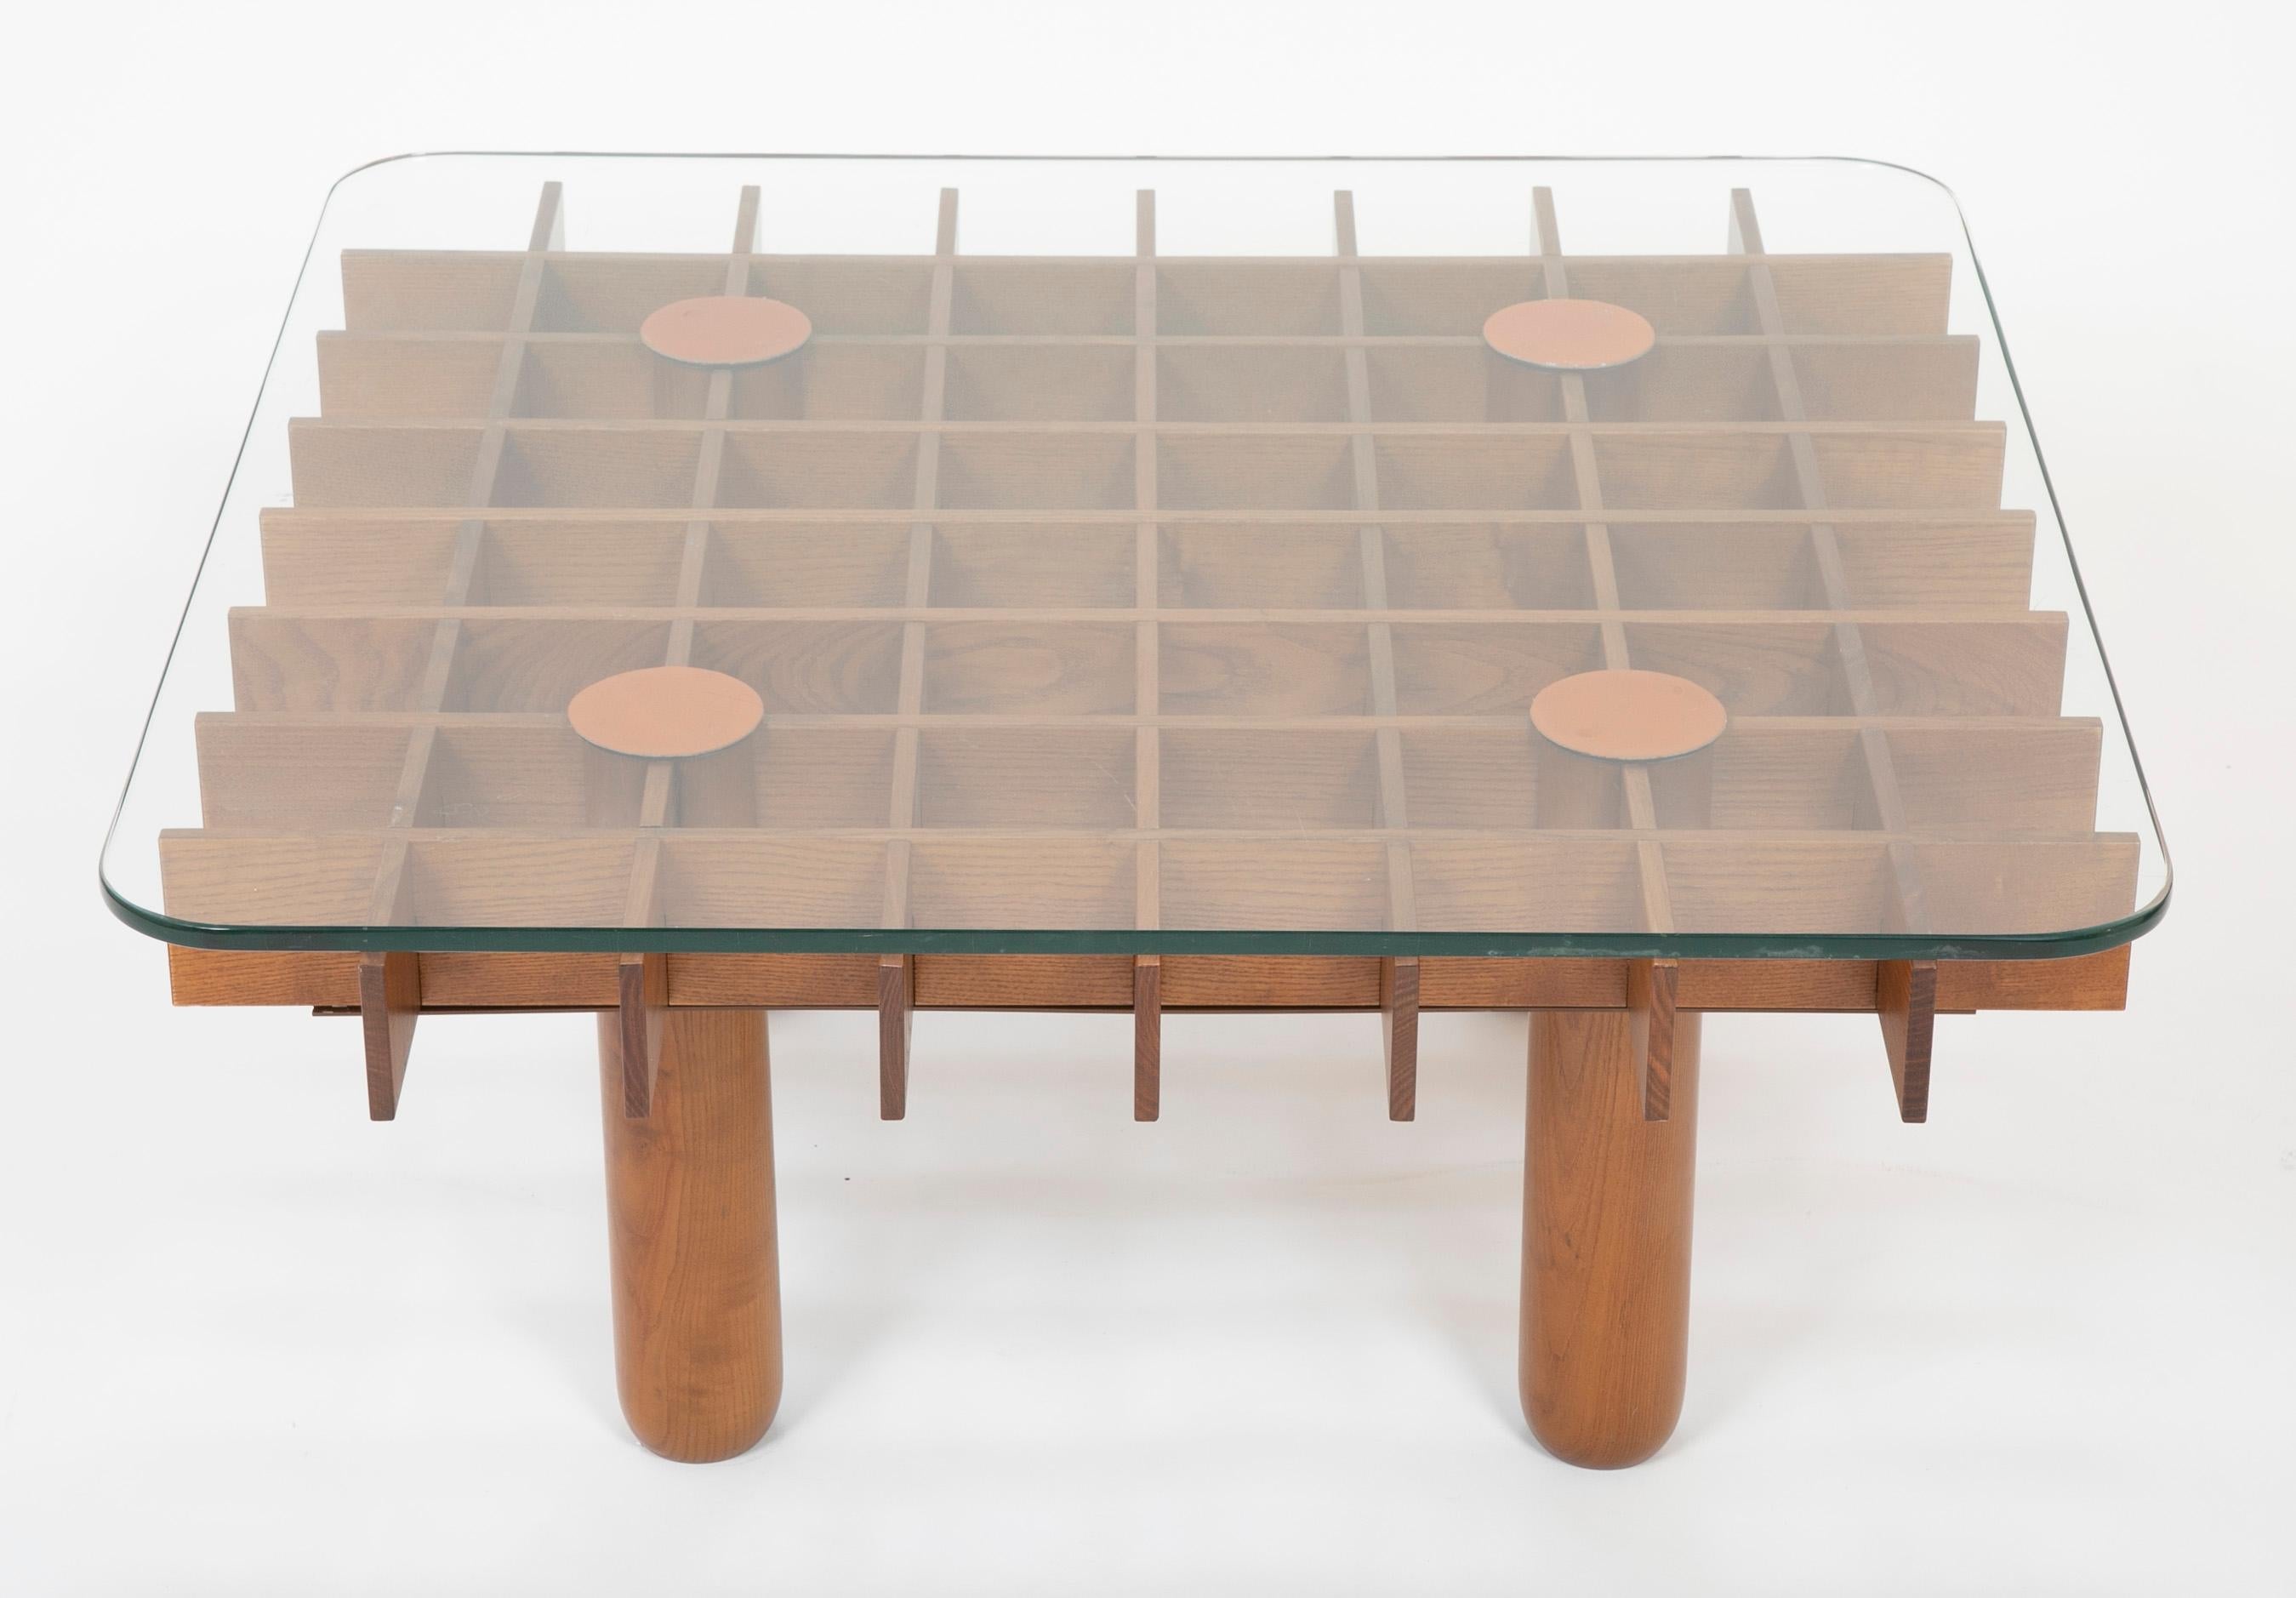 A grid form pine coffee table with leather pads and glass top. Designed by Fianfranco Frattini, produced for a short time by Knoll in 1974. Often called the Kyoto table although this is debatable because of its similarity in form and construction